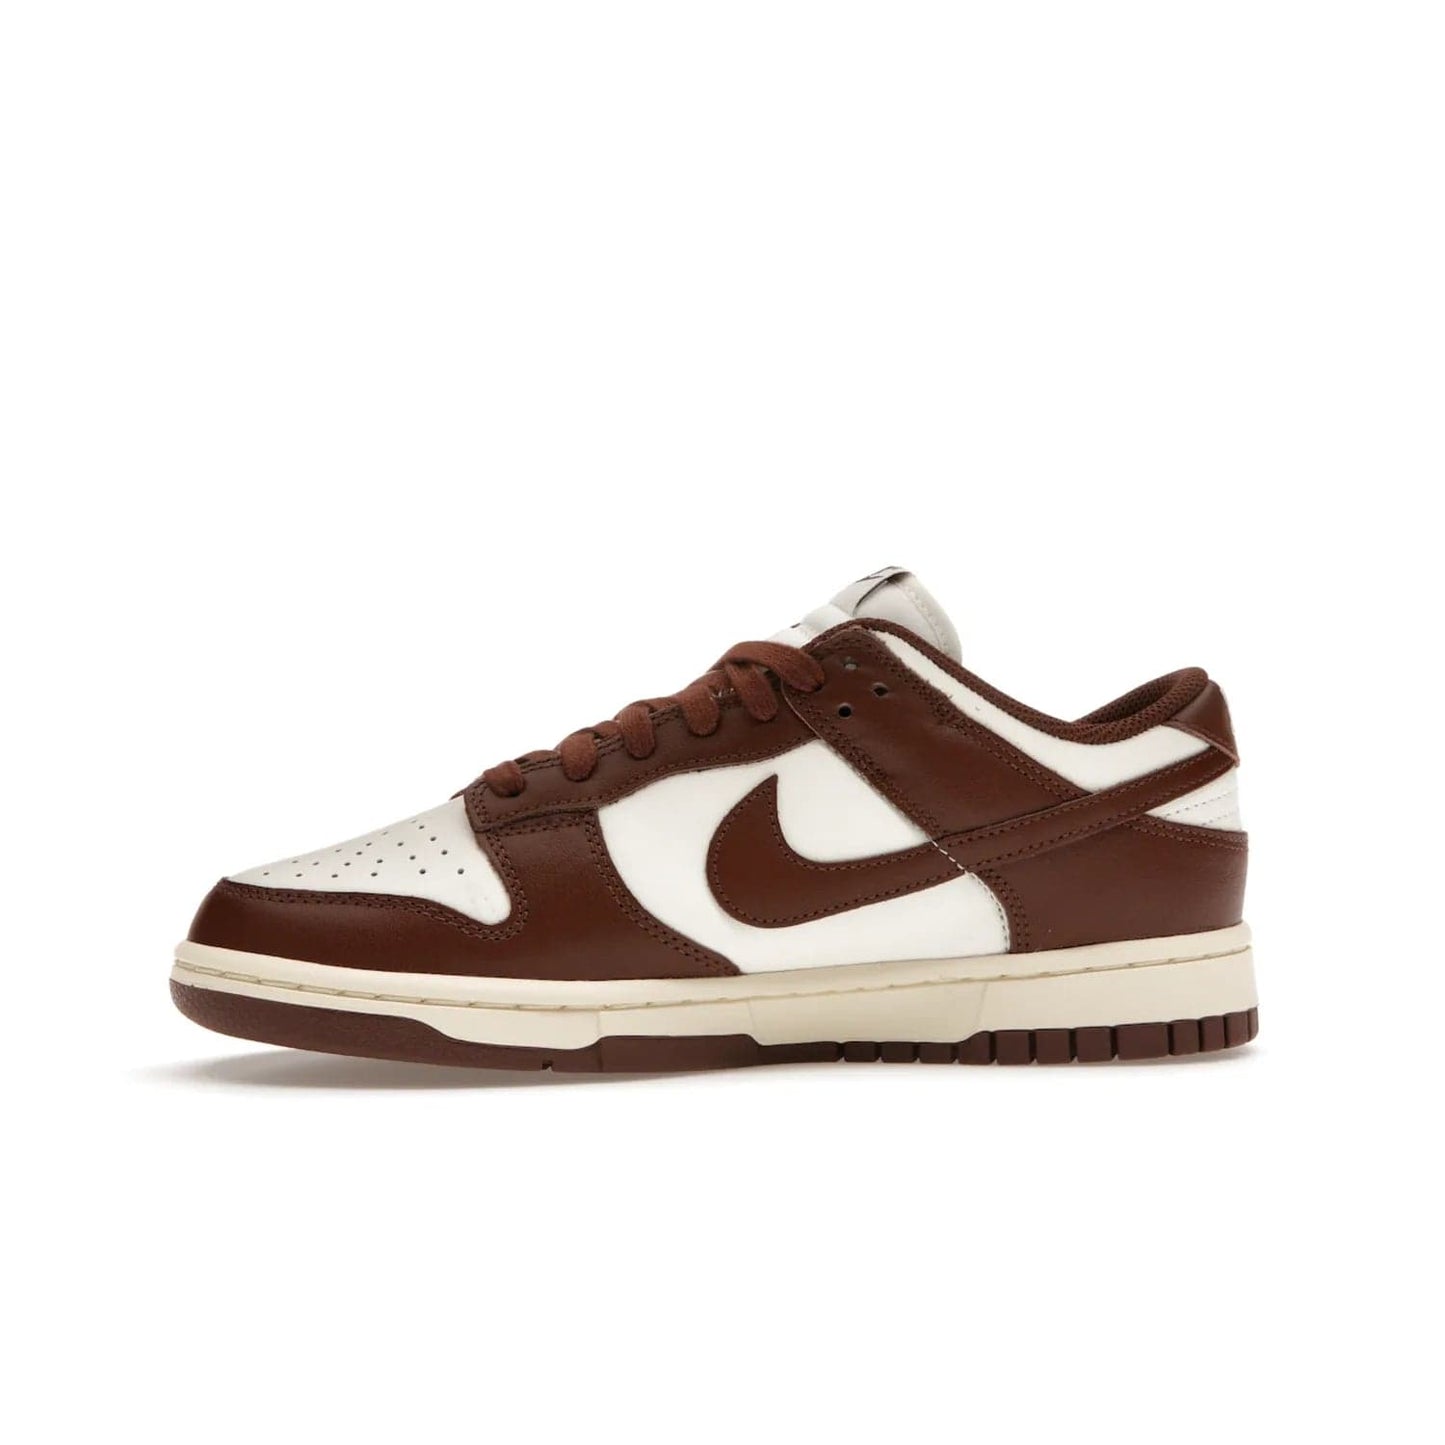 Nike Dunk Low Cacao Wow (Women's) - Image 18 - Only at www.BallersClubKickz.com - Revised
Get the Nike Dunk Low Cacao Wow and make a statement! Plush leather and a cool Cacao Wow finish bring together a unique mix of comfort and fashion that will turn heads. Boosted with a Coconut Milk hue. Shop today.